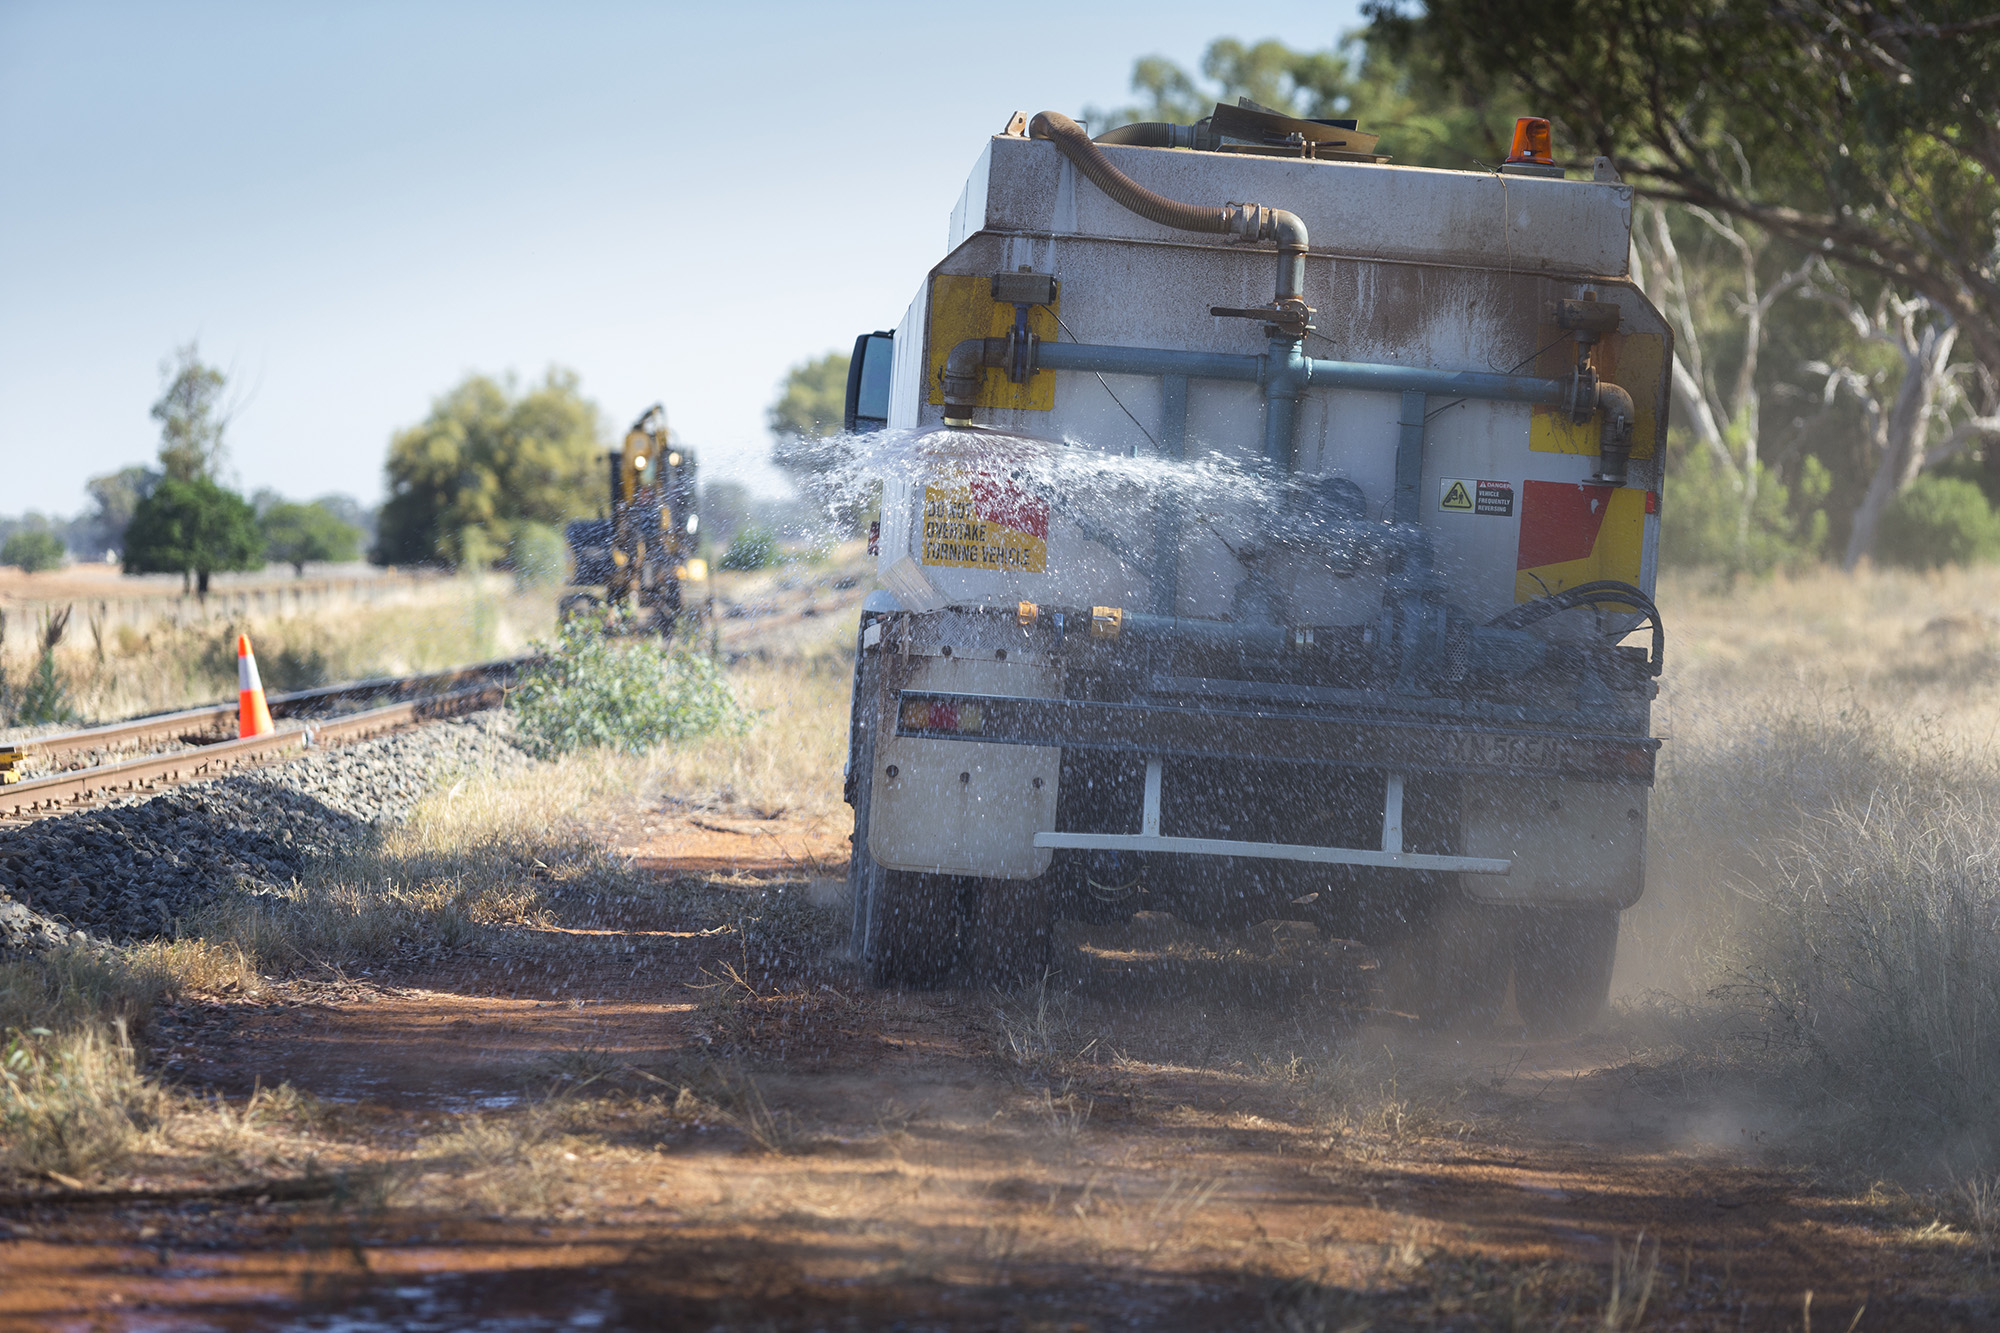 Water truck in action during construction